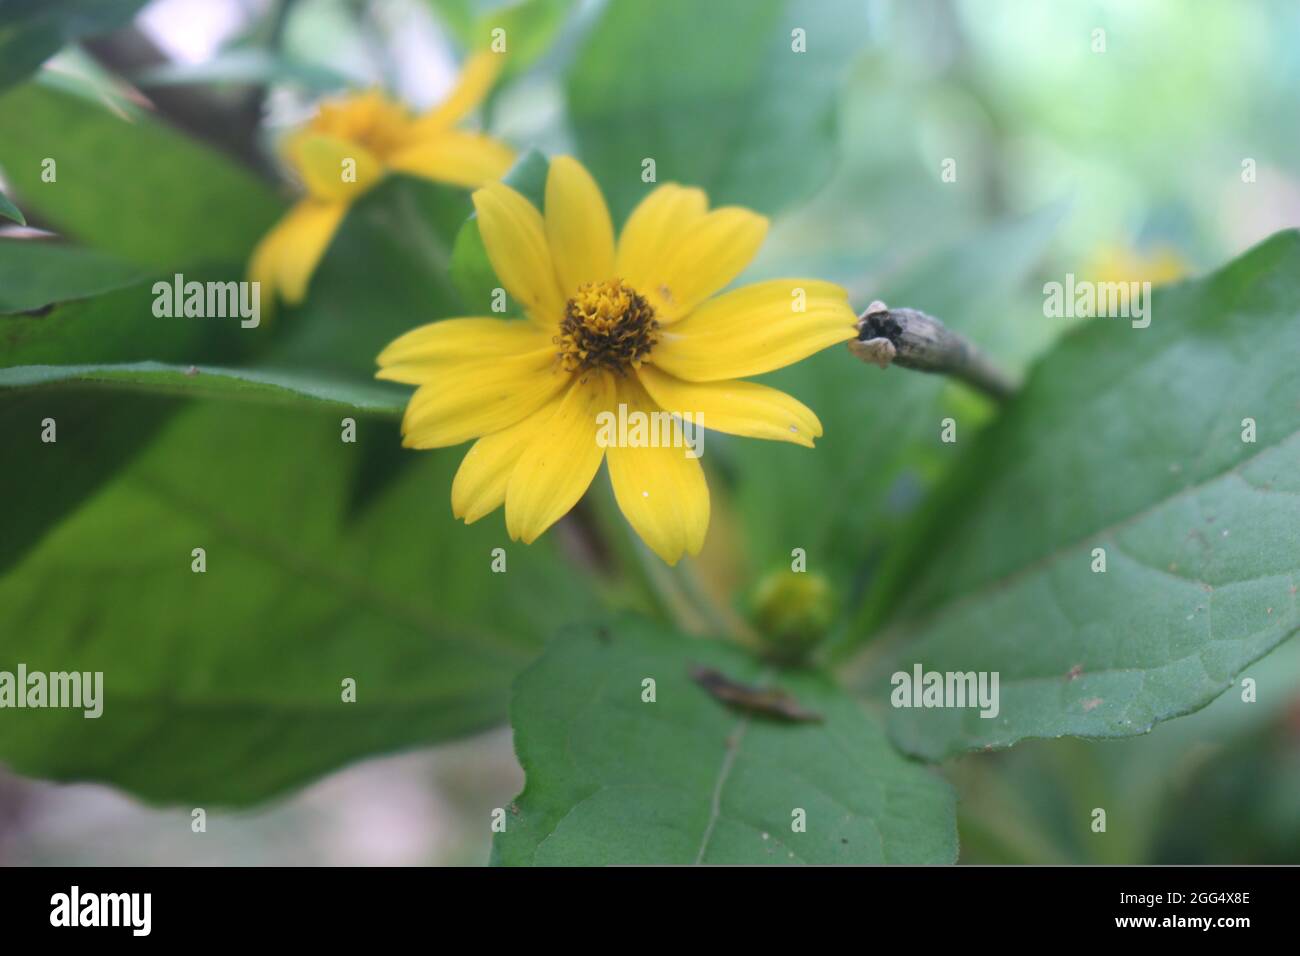 Close up picture of a dwarf sunflower blooming towards the sun in the morning with a greenish color background Stock Photo